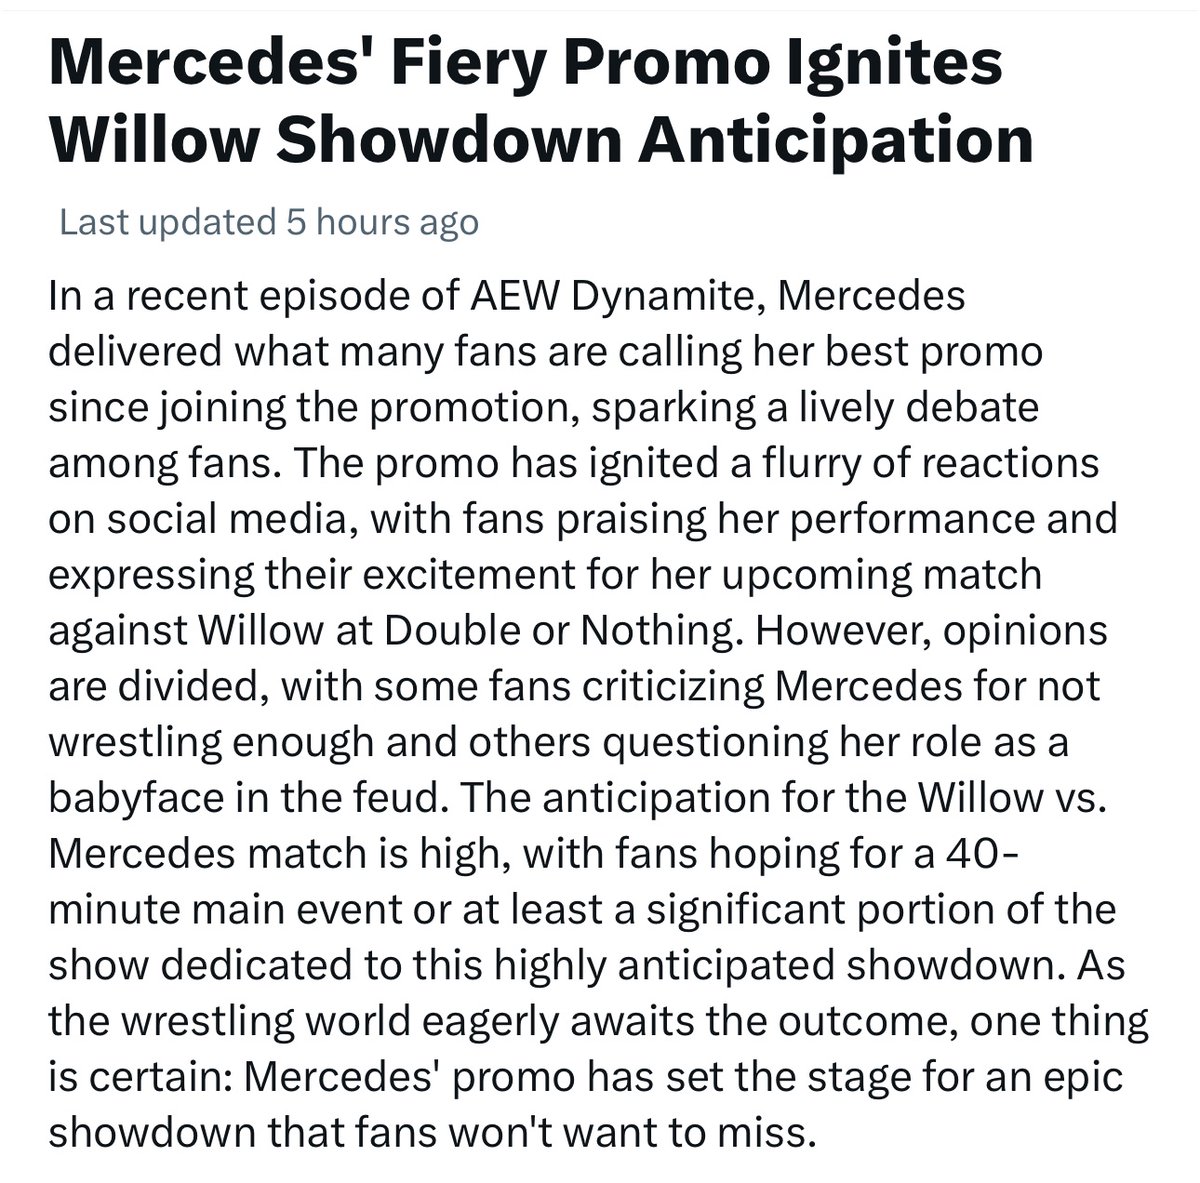 I don’t care what the 40-65 yr old IWC (MEN at that) has to say. Mercedes GOBBLED that promo last night! Just like she has been doing on every promo in AEW. All Mercedes gotta do is get back in that ring at DoN and remind yall. There is still no other WRESTLER today like her. X…